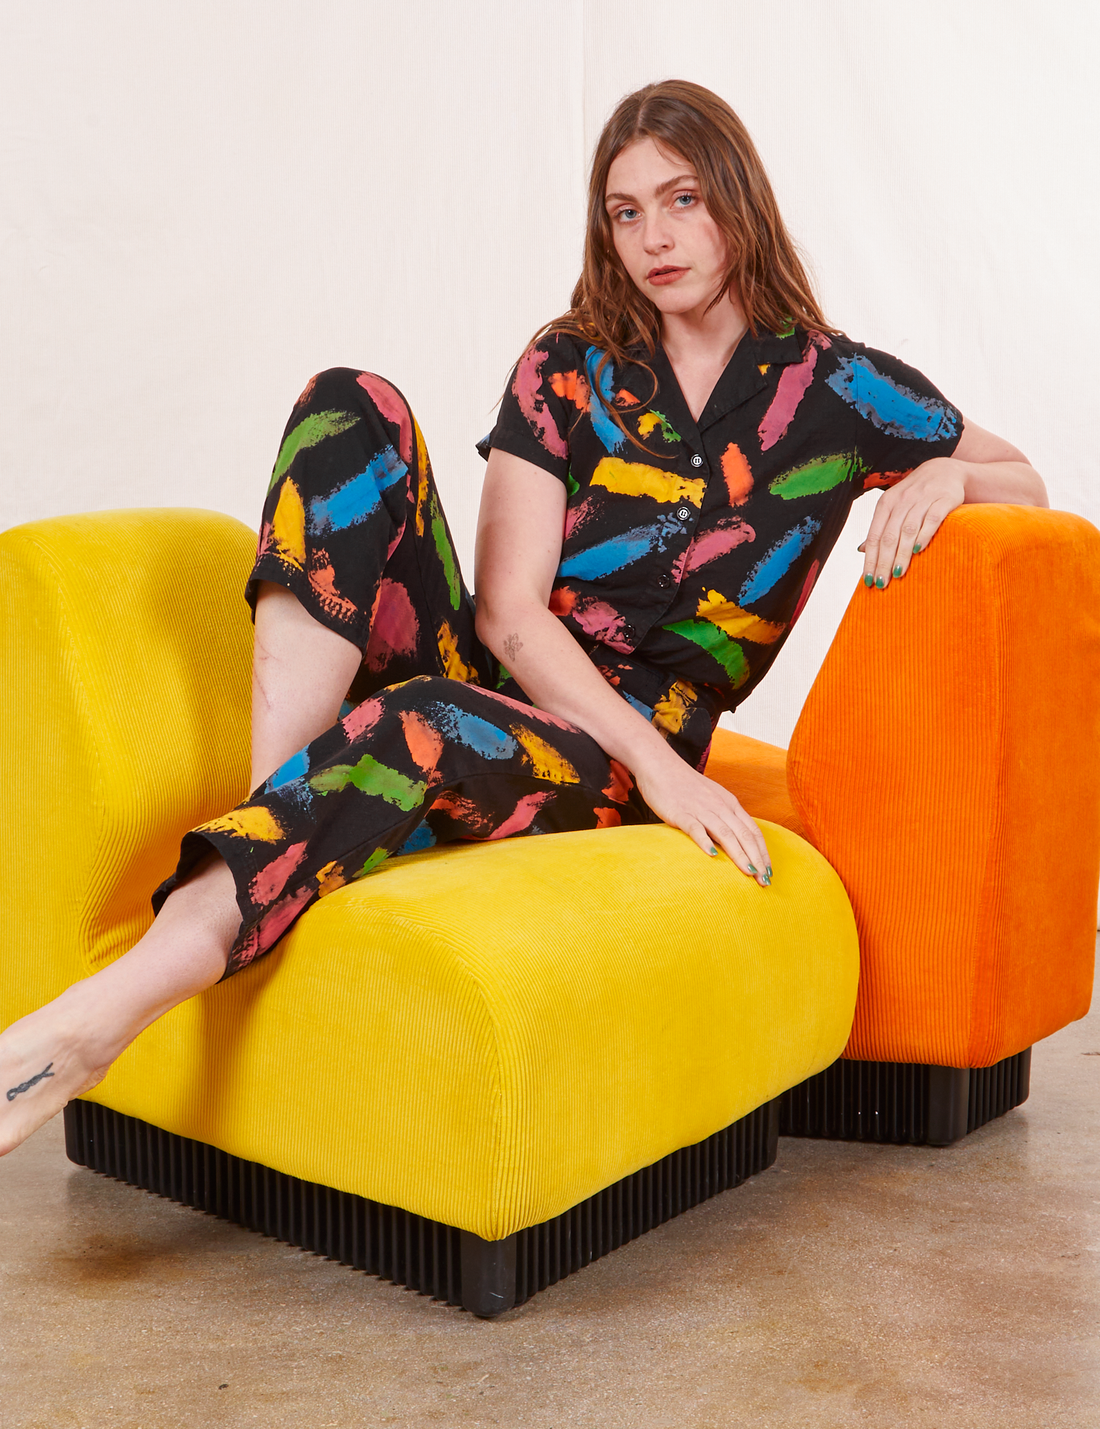 Allison is sitting on a yellow upholstered chair wearing Pantry Button Up in Paint Stroke and matching Work Pants